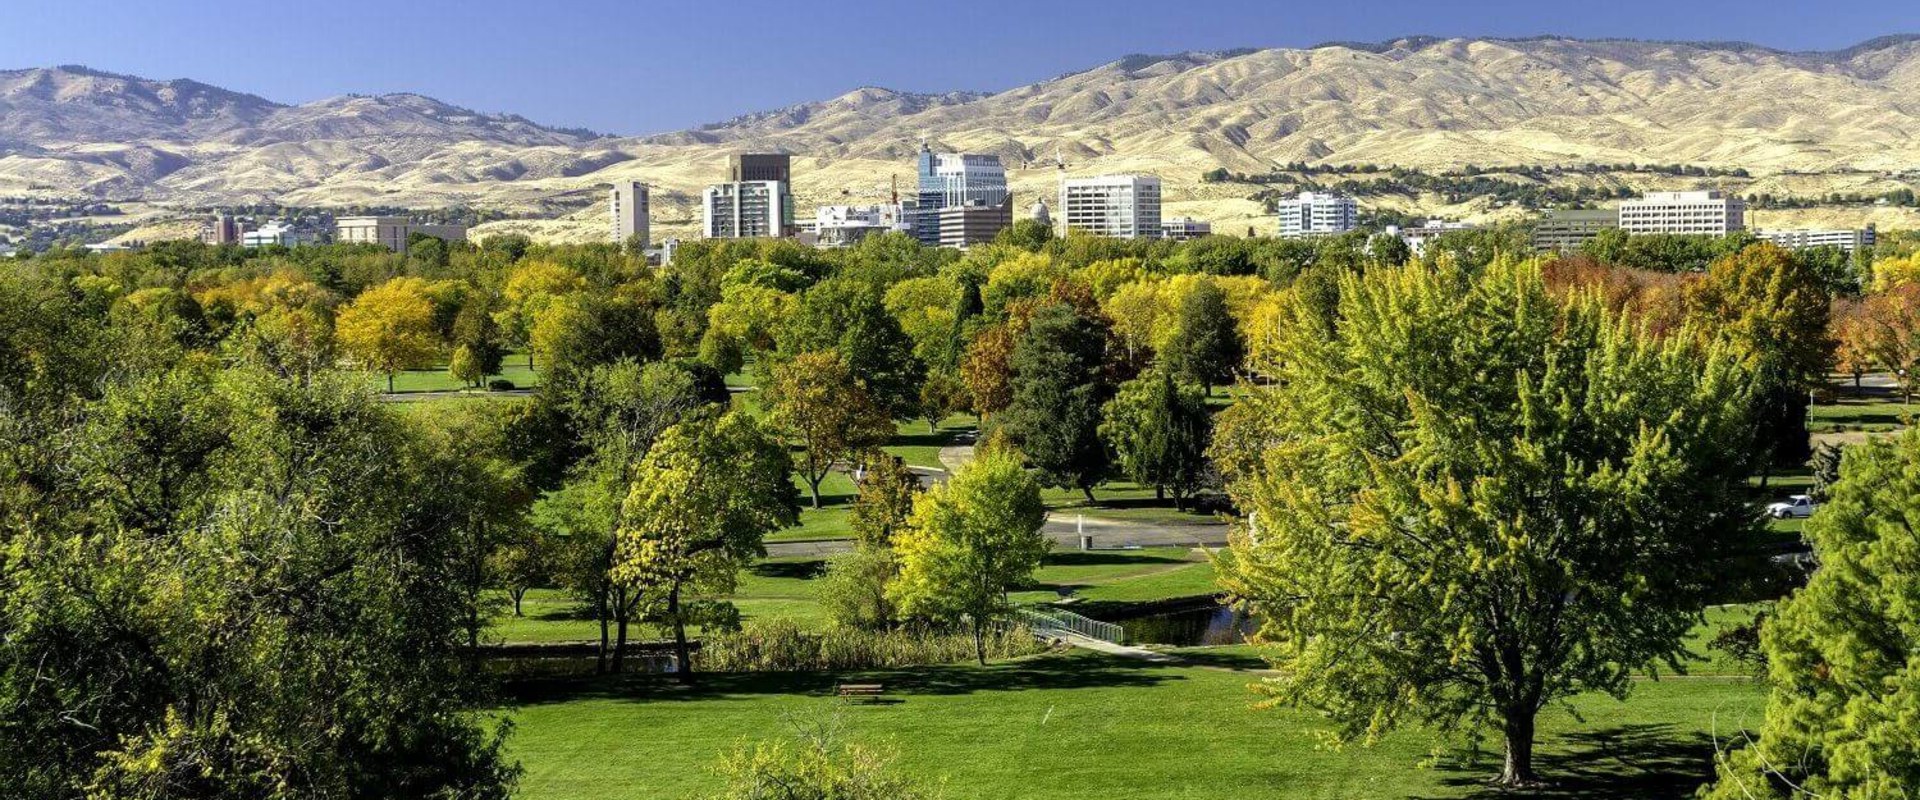 Boise, Idaho: A Leader in Sustainability and Environmentalism